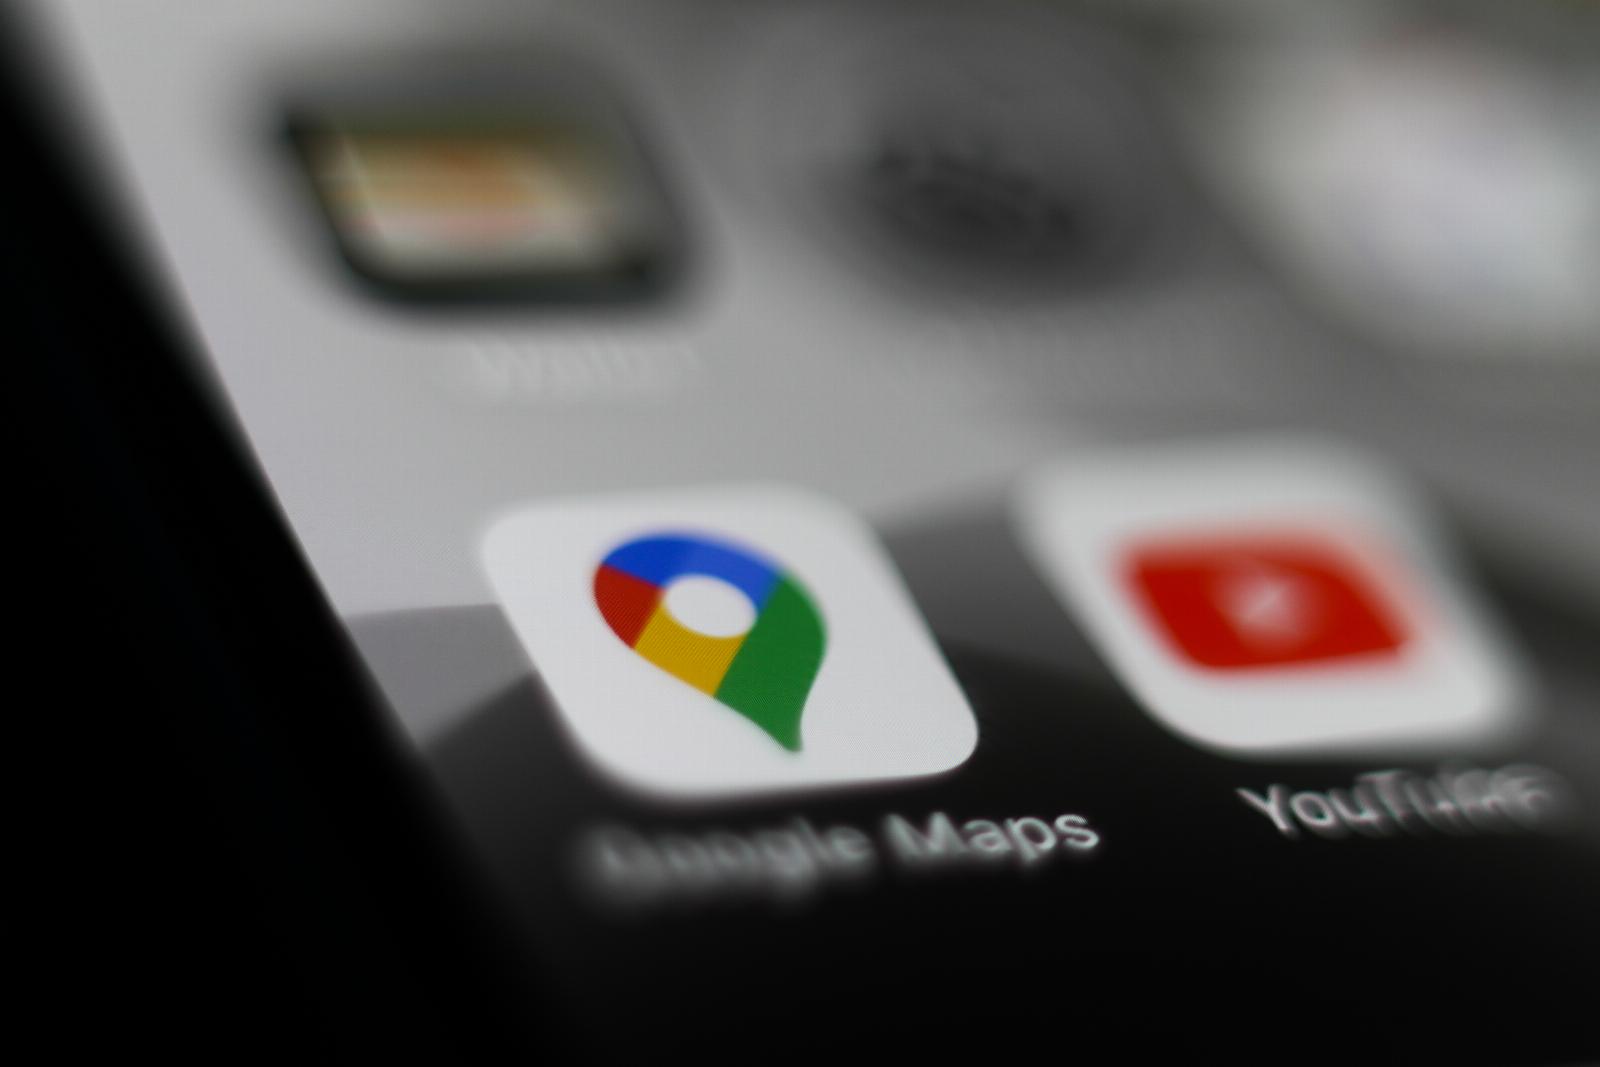 Google Maps gets new updates to give users more control over their information